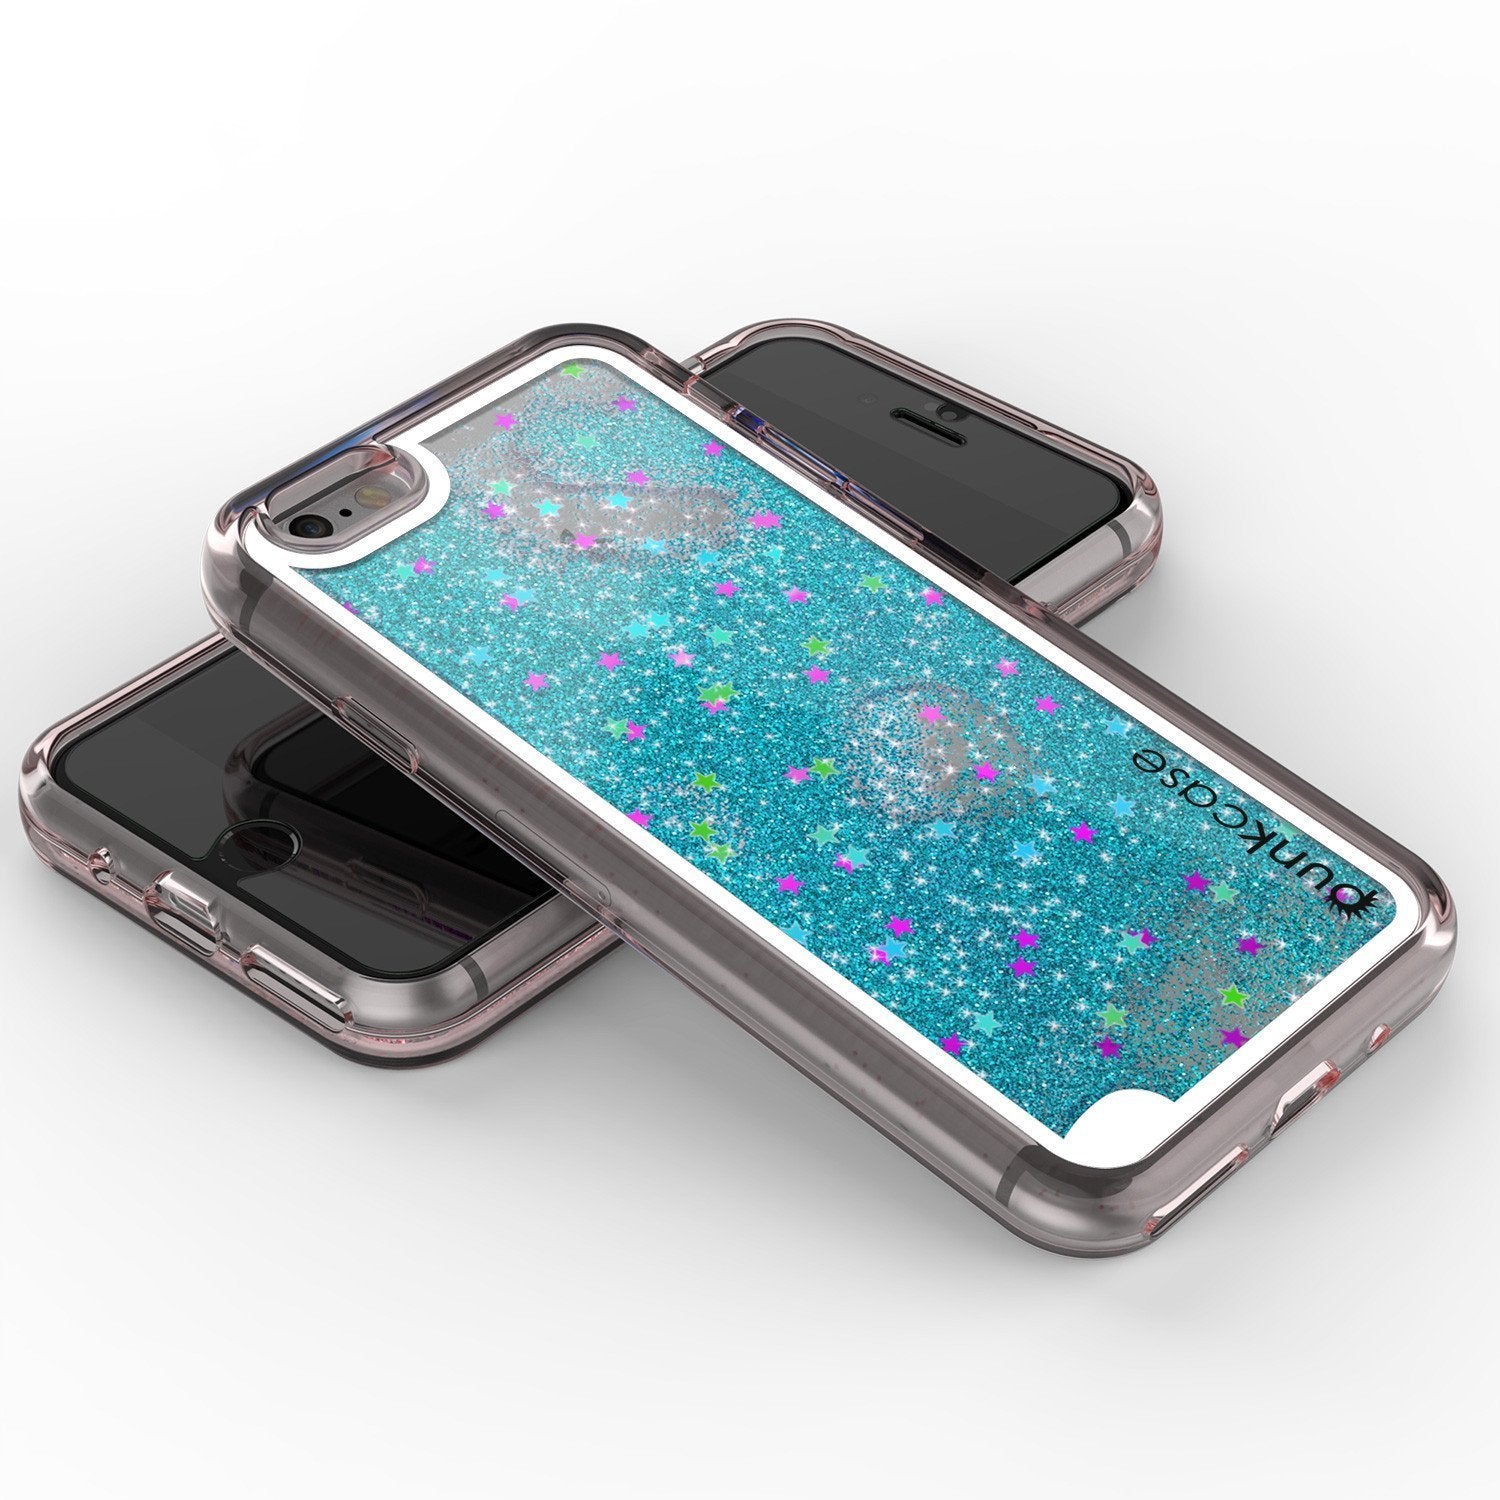 iPhone SE (4.7") Case, PunkCase LIQUID Teal Series, Protective Dual Layer Floating Glitter Cover